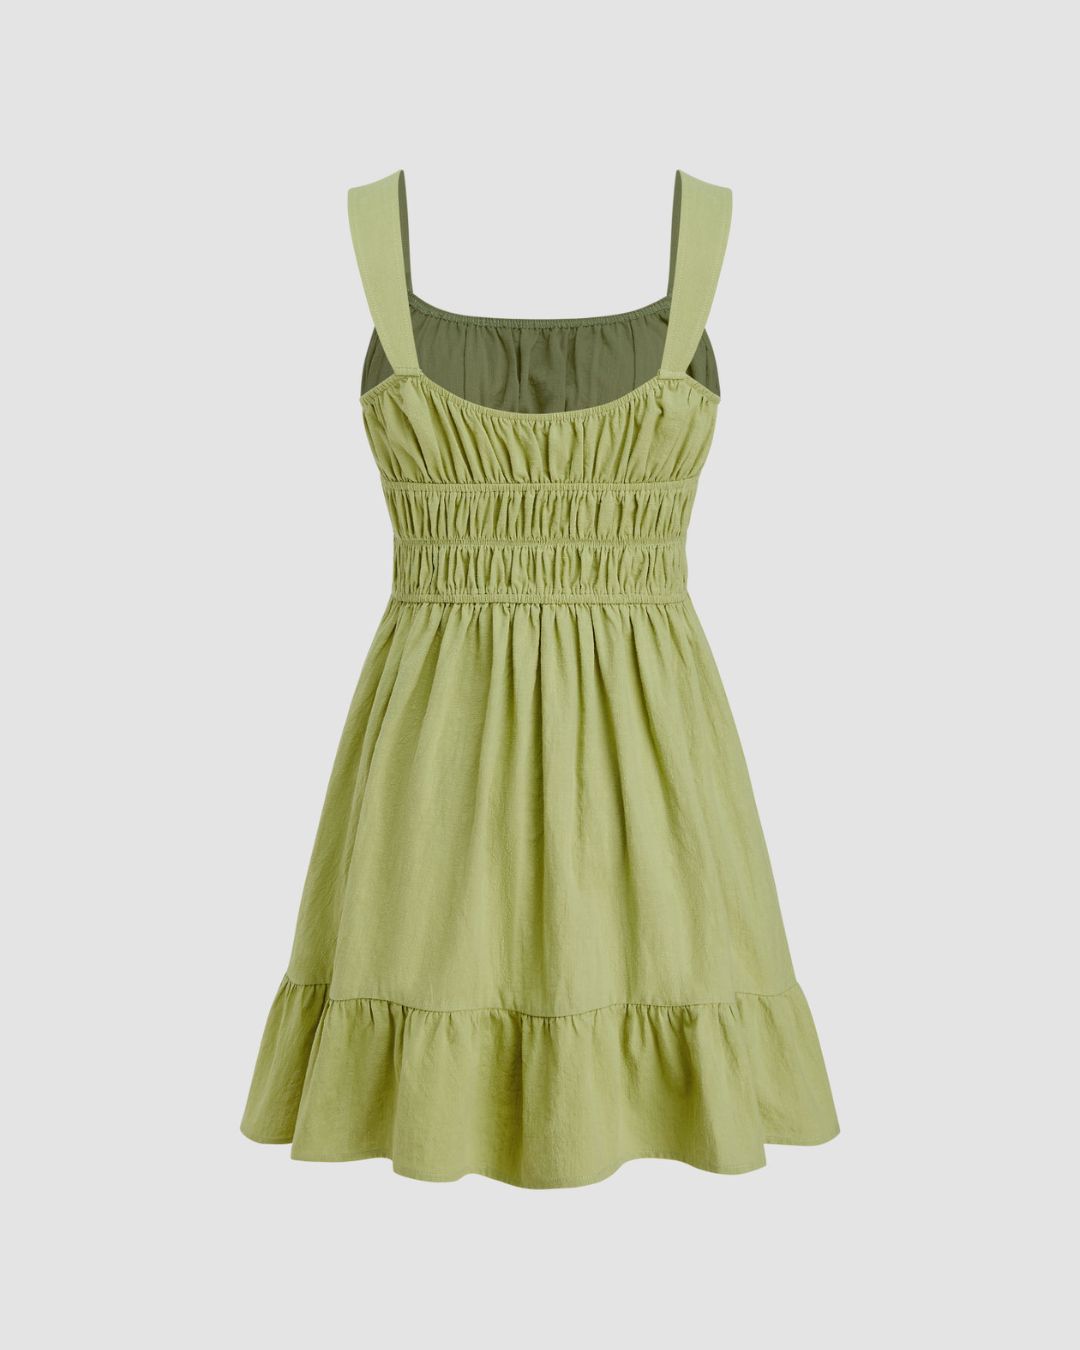 RUCHED FIT AND FLARE DRESS,beach, cotton flex, dresses, fit and flare, green, mini, regular fit, ruched, ruffled, shoulder strap, sleeveless, solid, square neck, vacation, woven,ruched-fit-and-flare-dress-green,Color- Green
Fabric- Cotton Flex
Type- Fit And Flare
Fit- Regular Fit
Length- Mini
Neck- Square Neck
Sleeve- Sleeveless
Straps- Shoulder Strap
Print- Solid
Details- Ruched Bodice